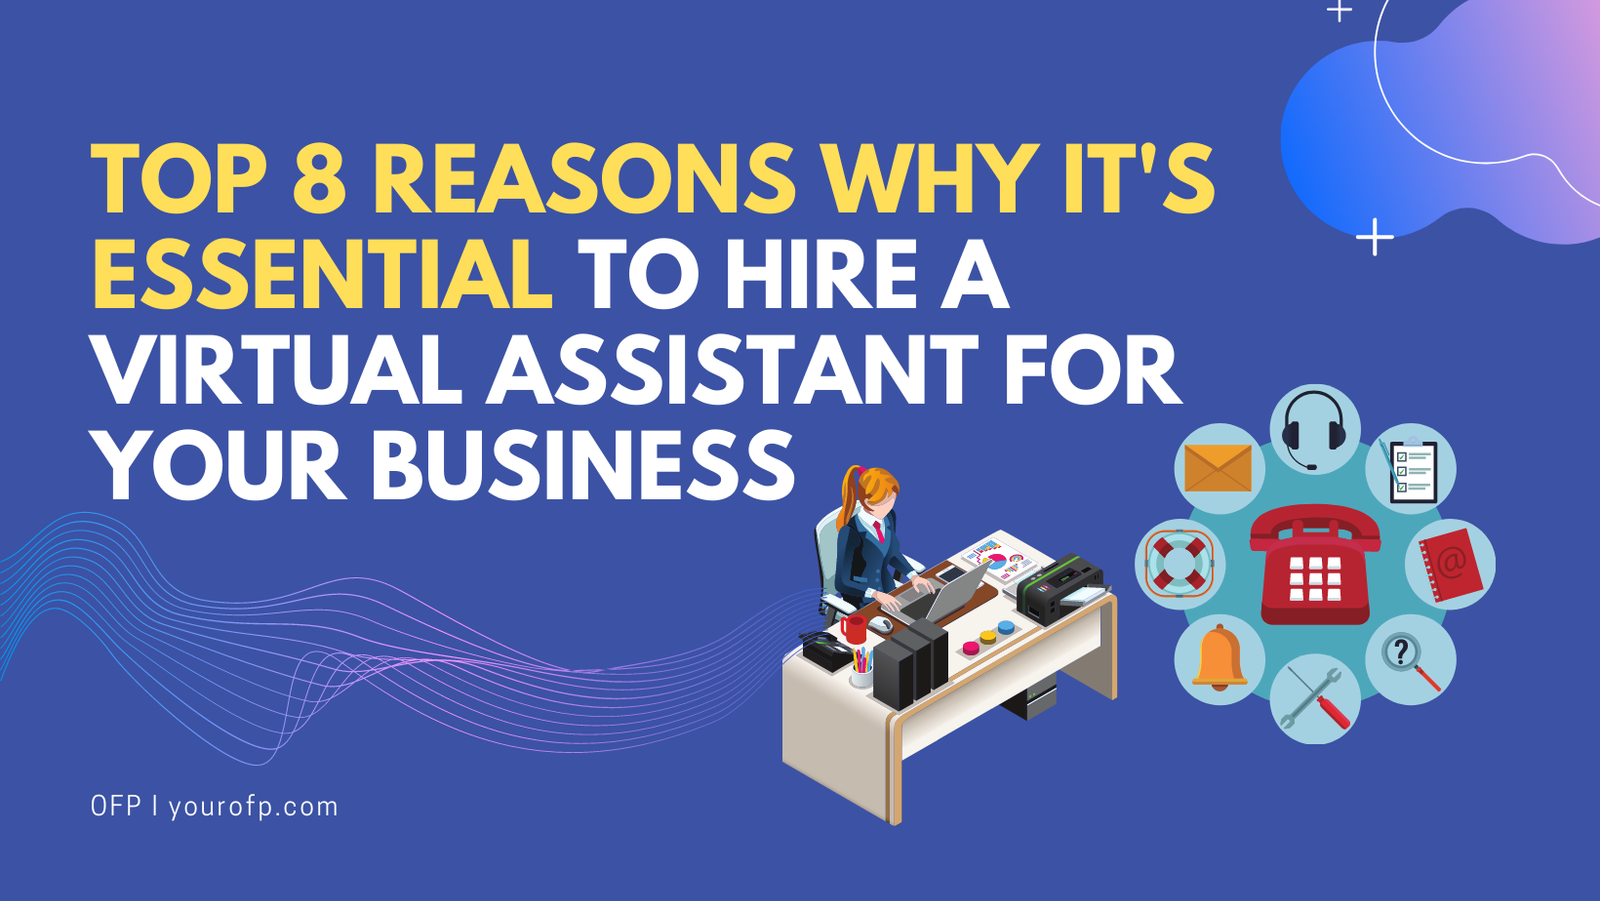 Top 8 Reasons Why It's Essential To Hire A Virtual Assistant For Your Business